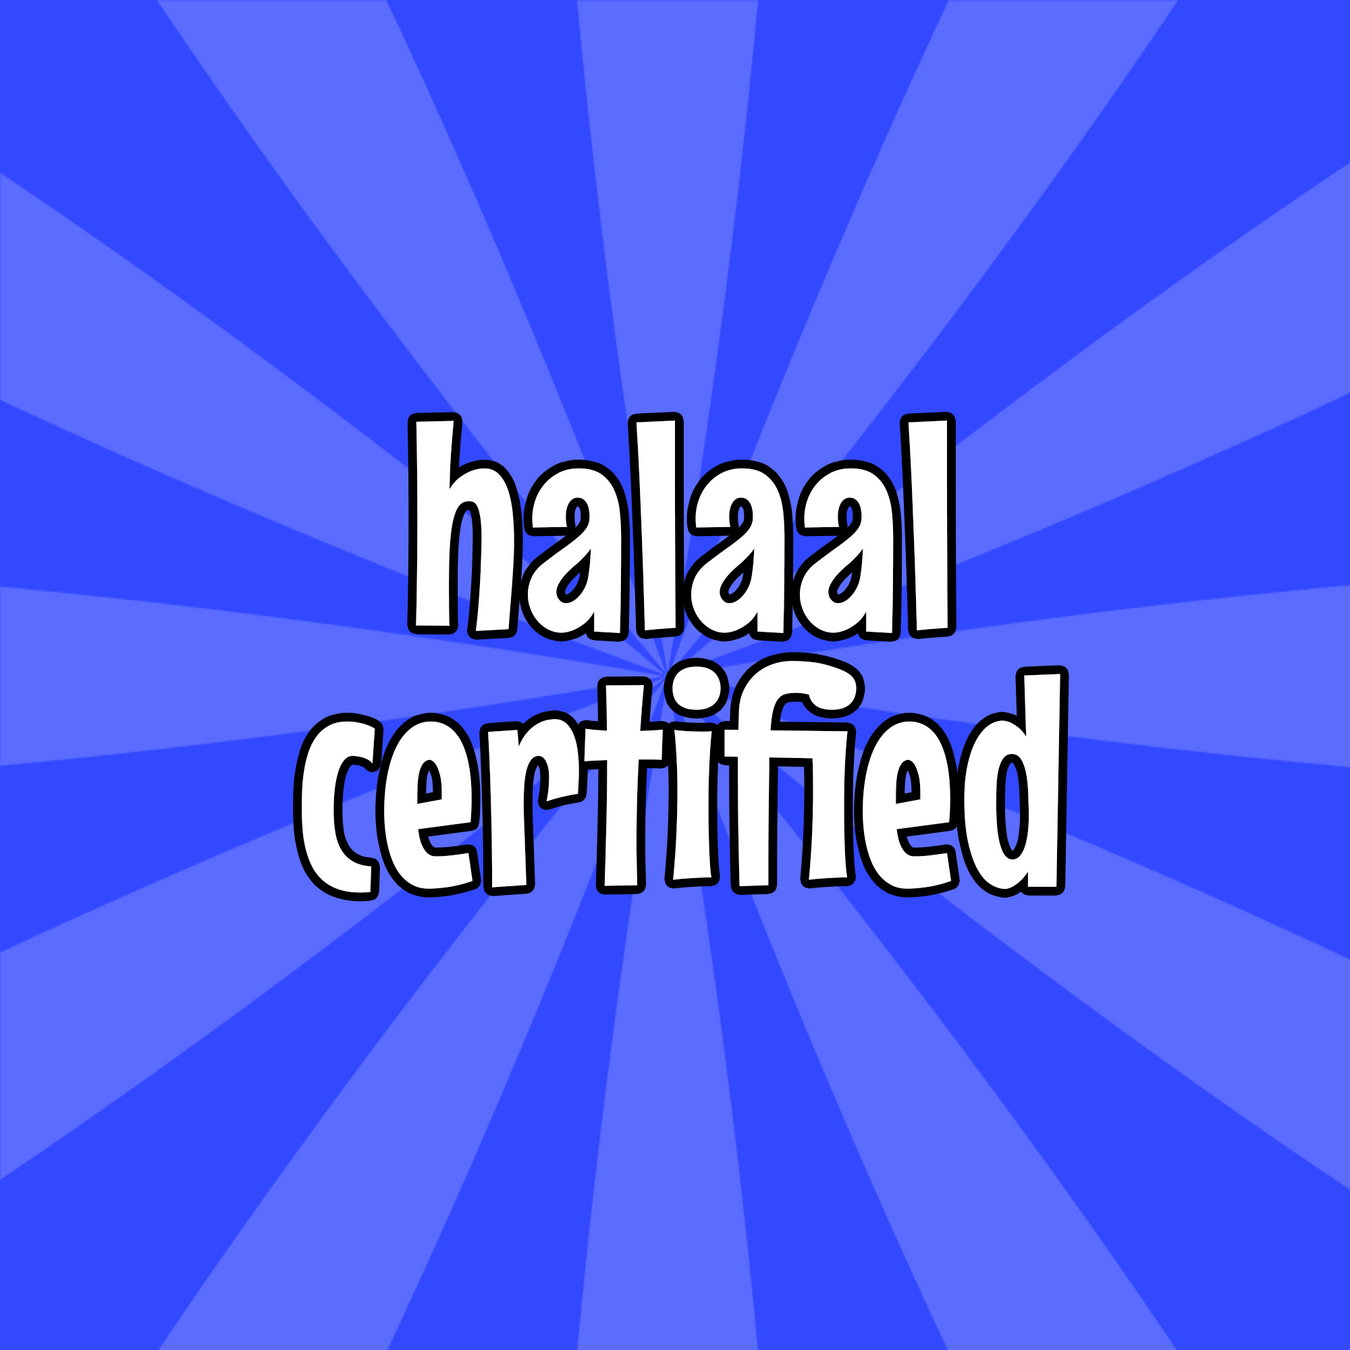 HALAAL Sugarfree, Glutenfree, Diabetic, Low Carb, Keto, and Banting Products